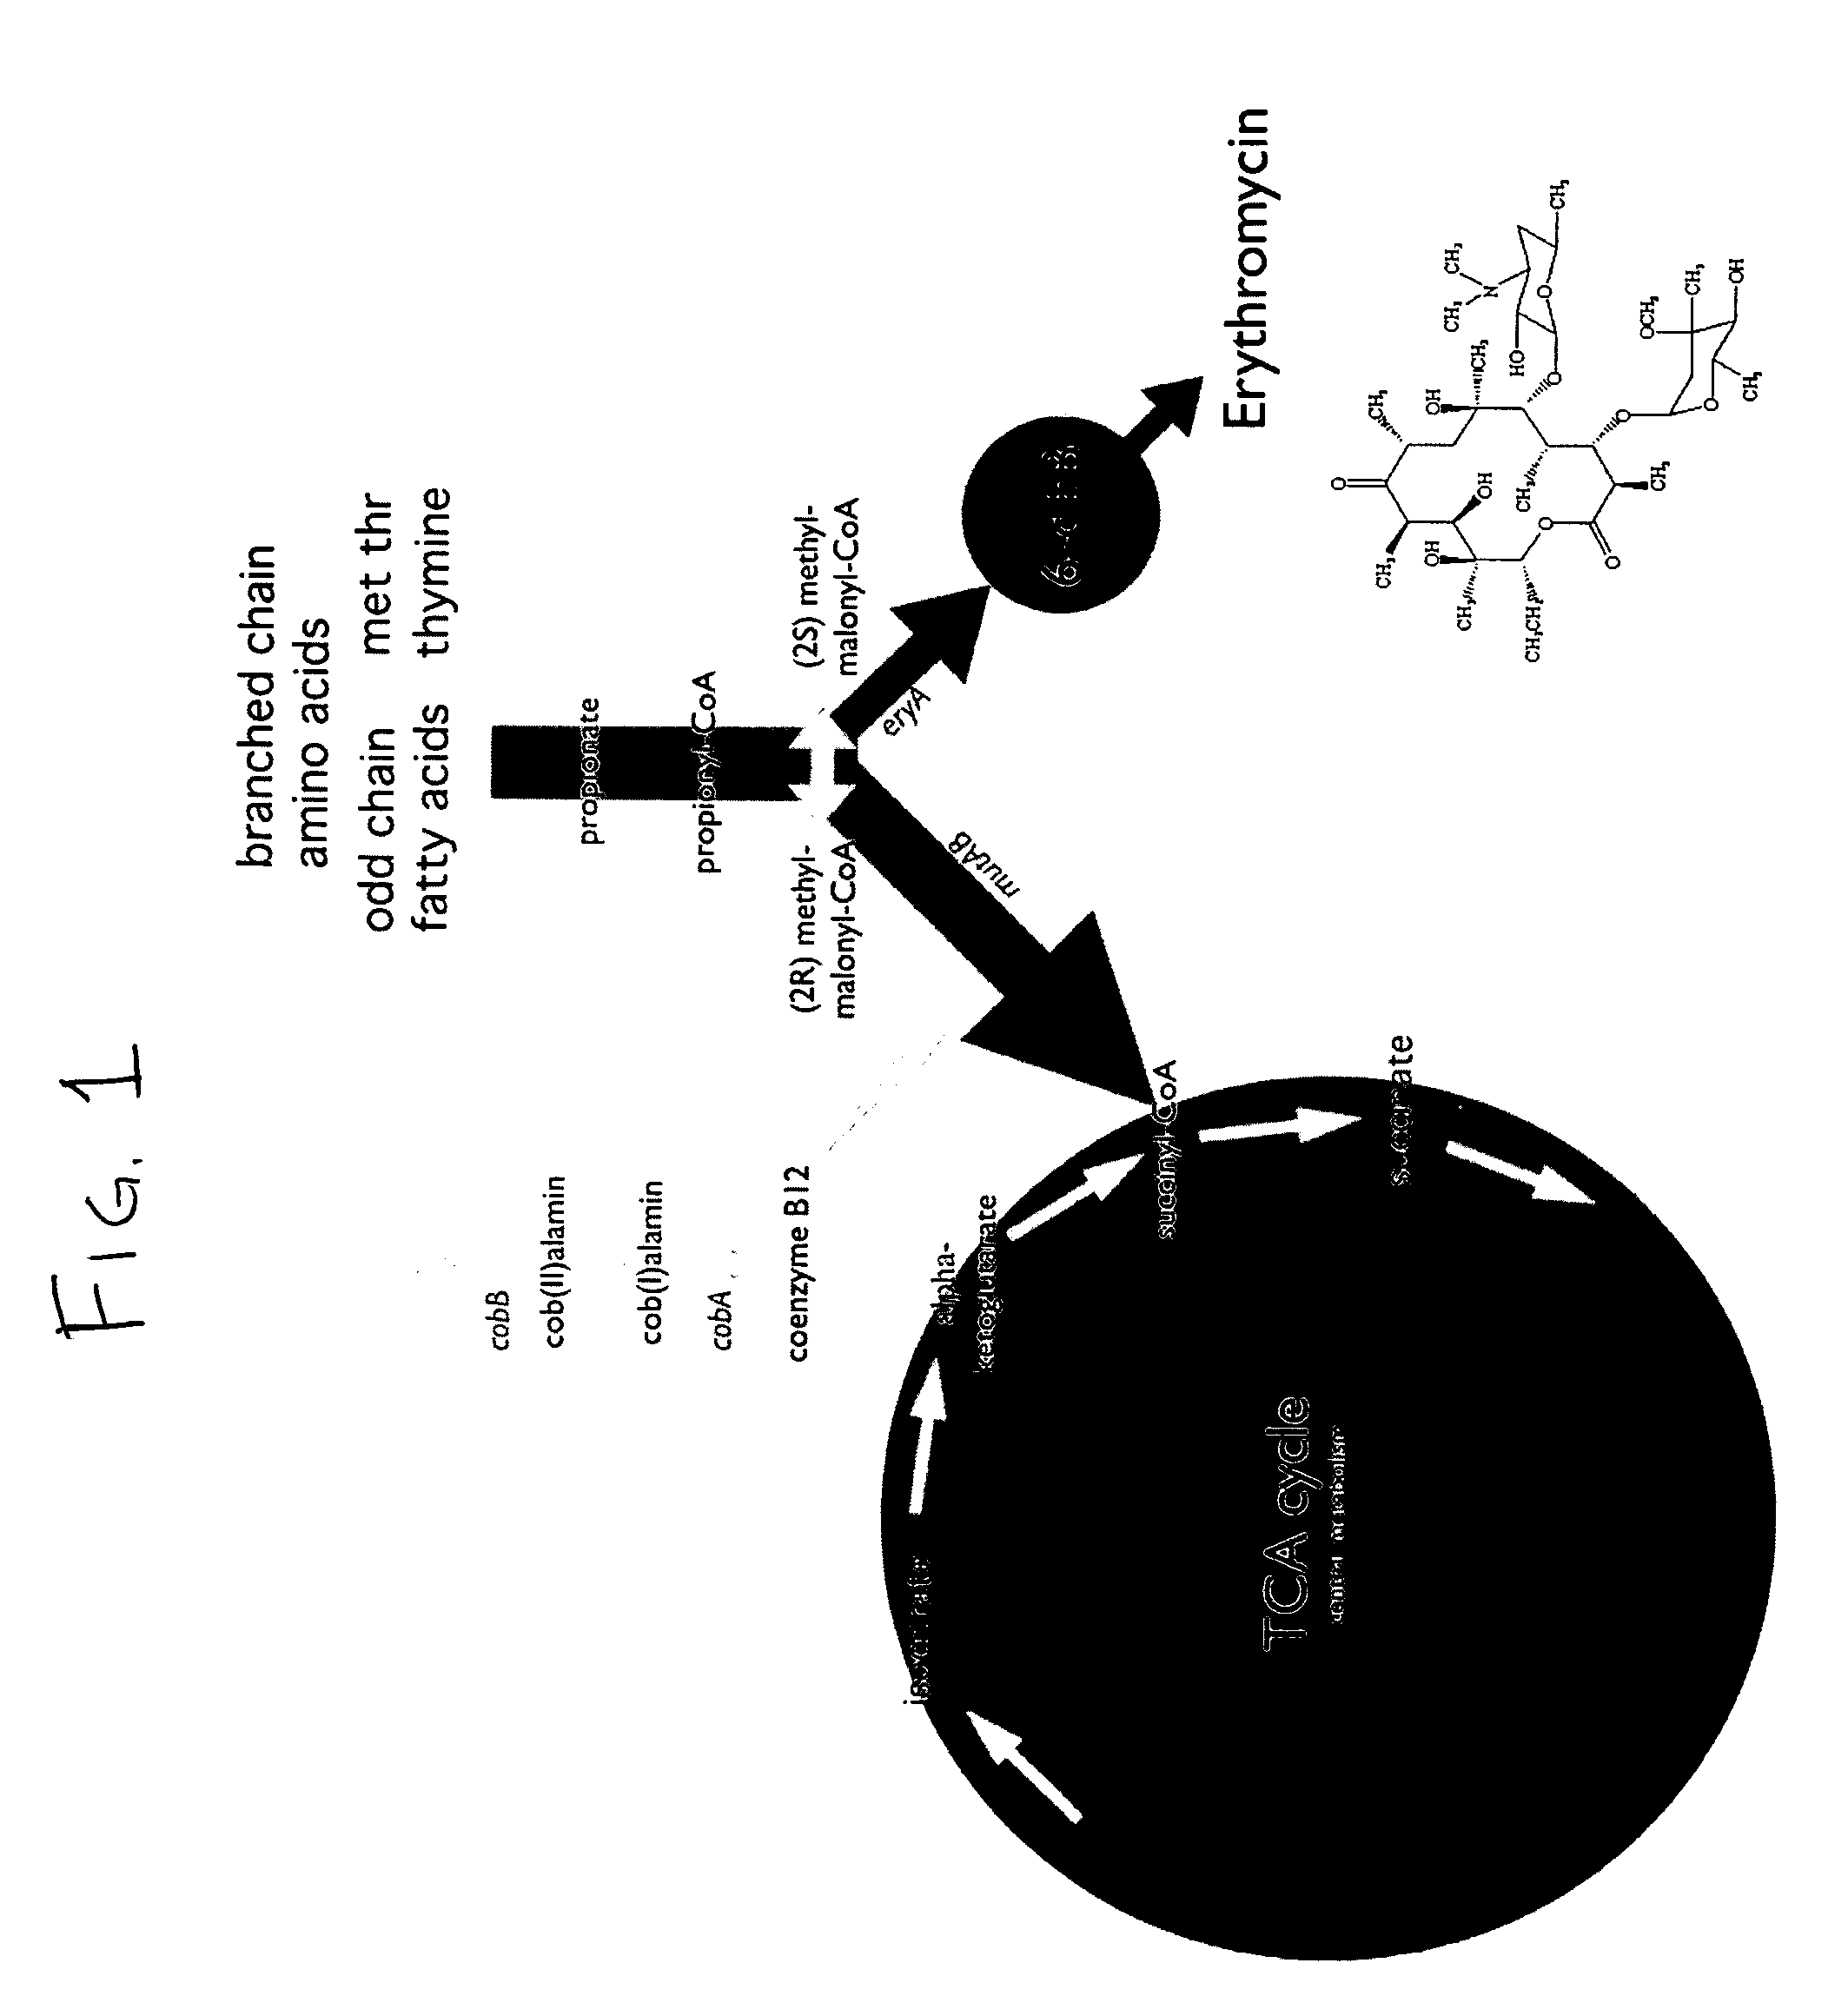 Process of increasing cellular production of biologically active compounds